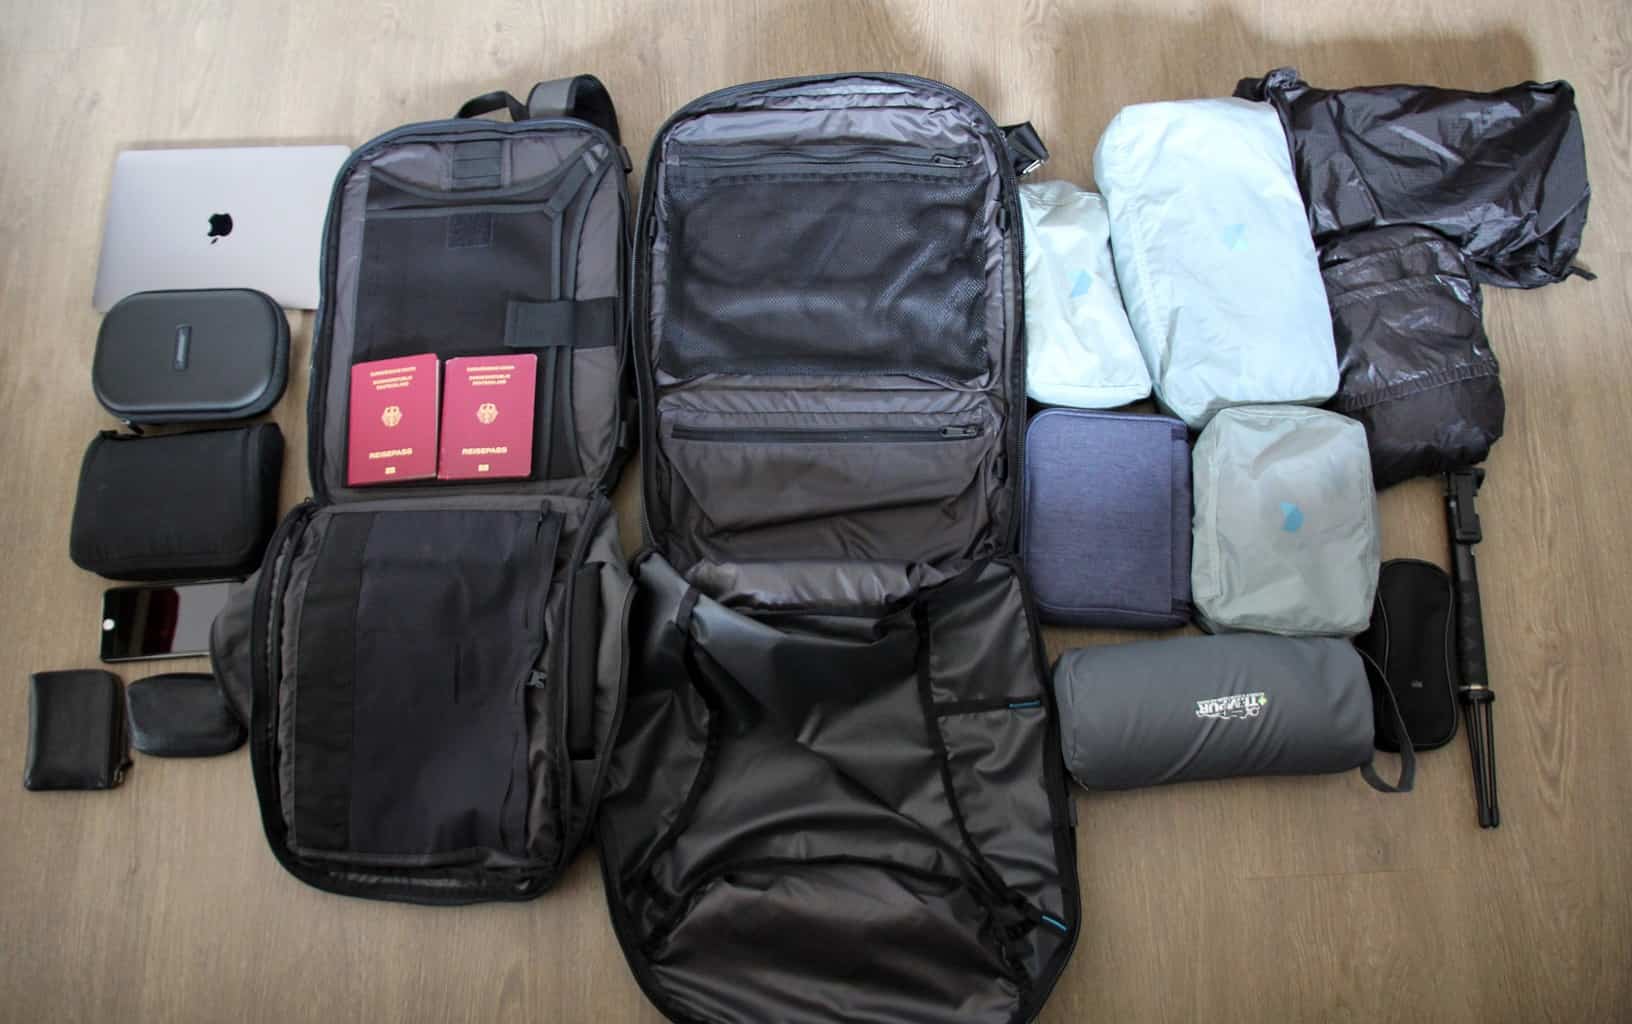 Minimalist Packing List for a Week – How to Pack Light for a Week’s Trip